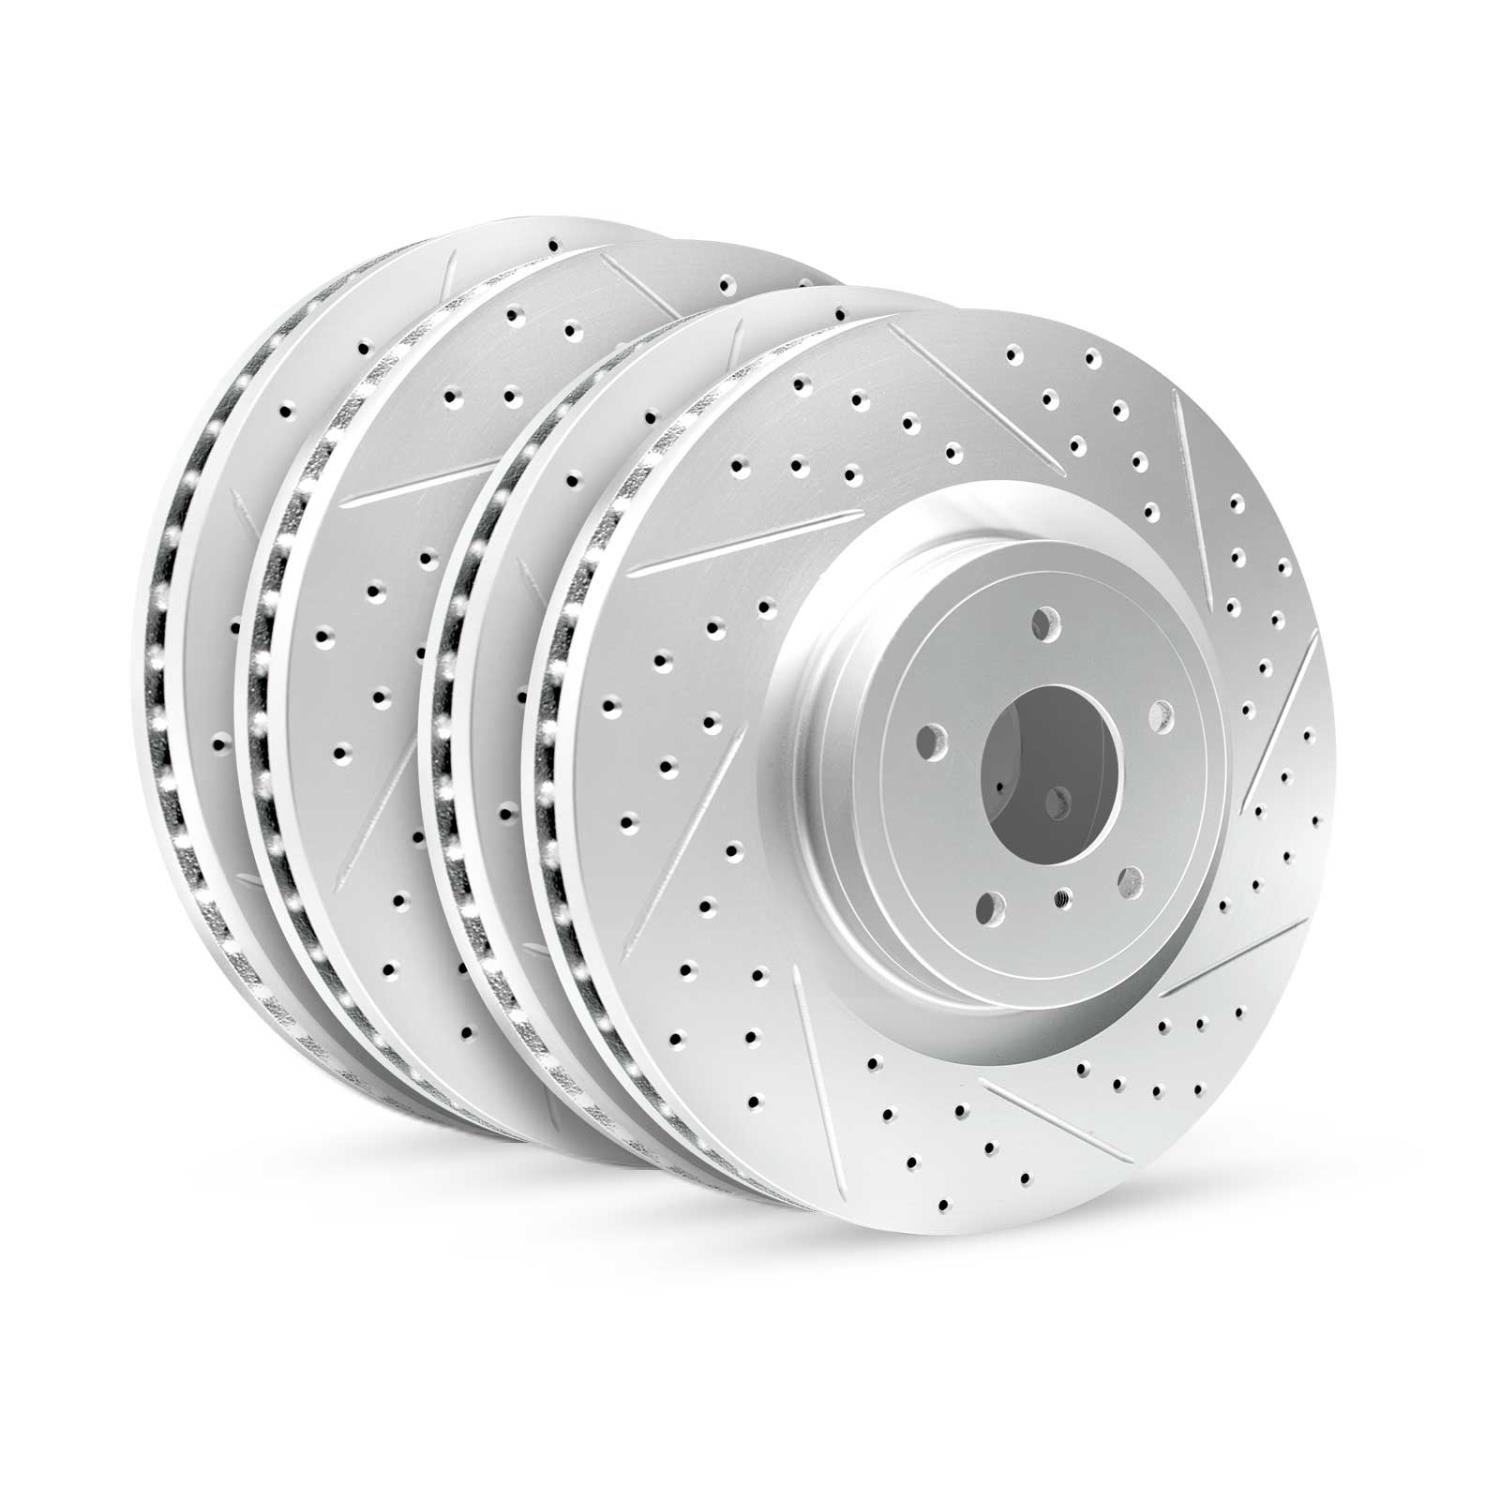 GEO-Carbon Drilled/Slotted Rotors, 2009-2014 Subaru, Position: Front/Rear